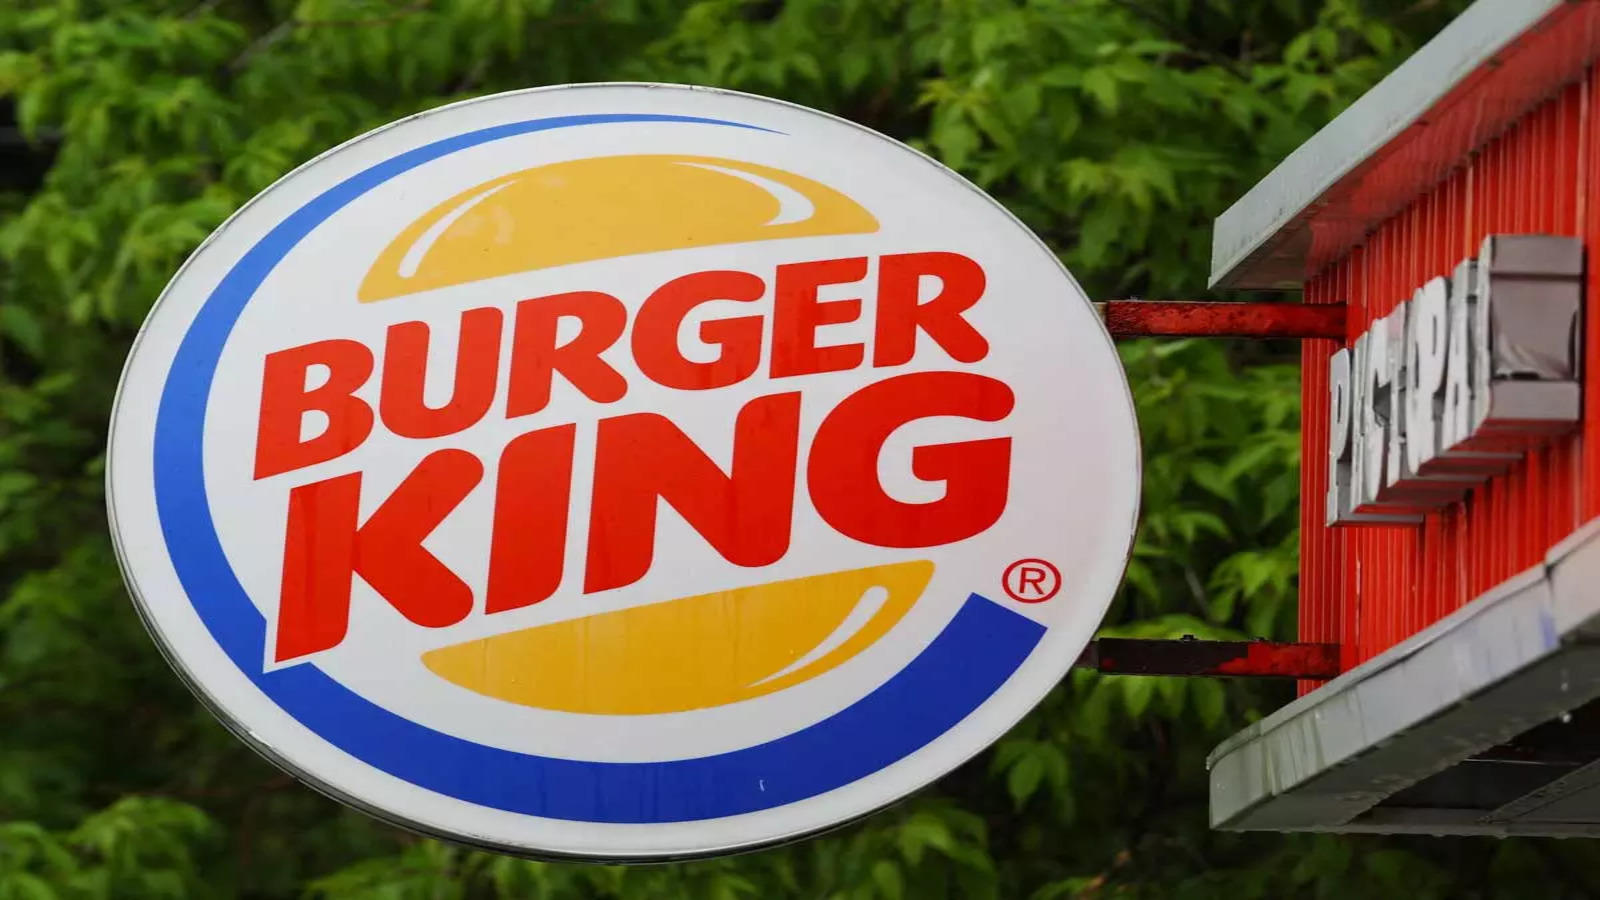 Unveiled Secrets: What It's Really Like to Work at Burger King – Rules and Reality